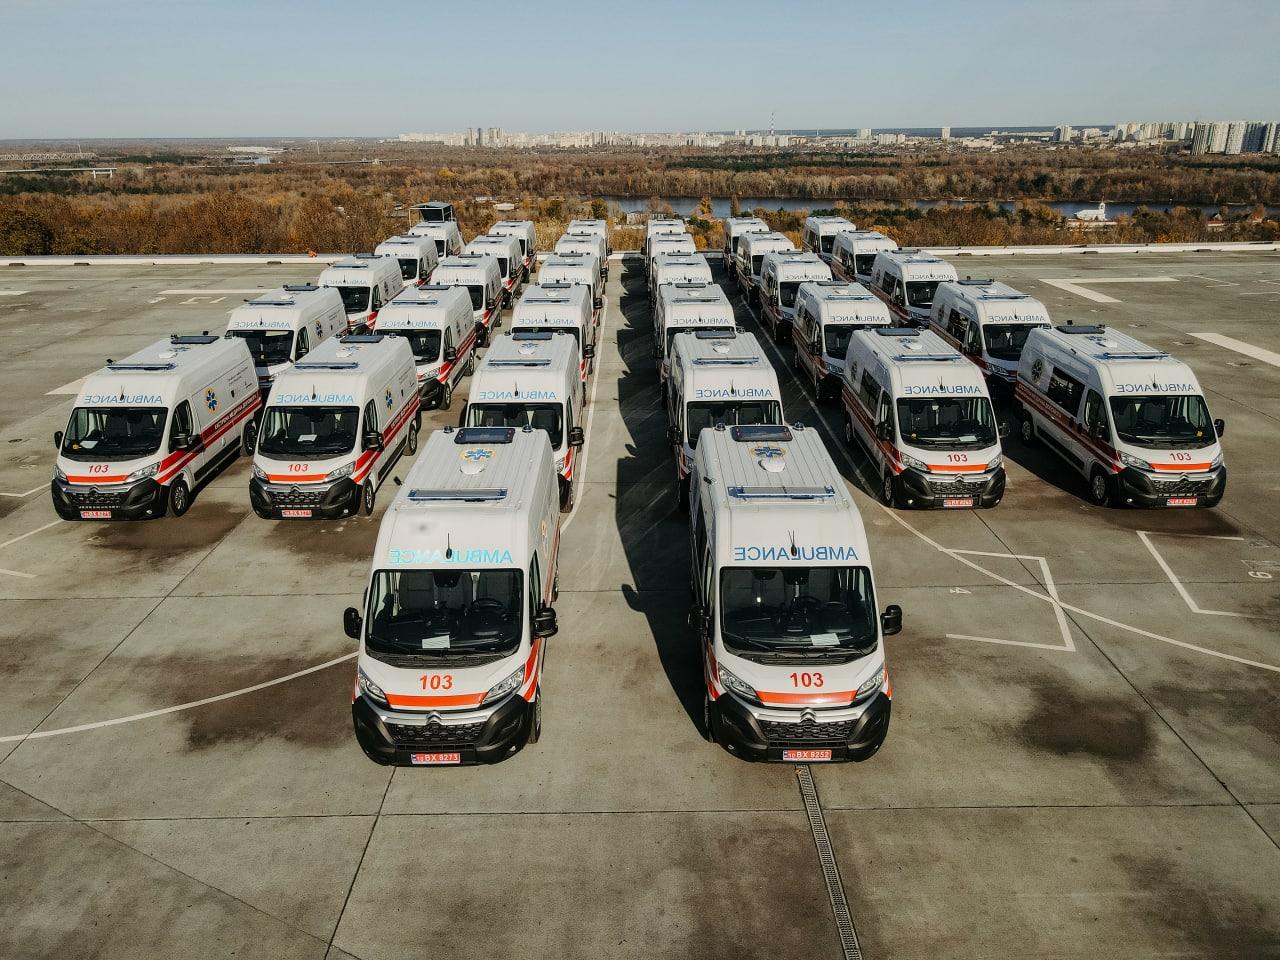 Another 32 resuscitation vehicles were sent off to save lives